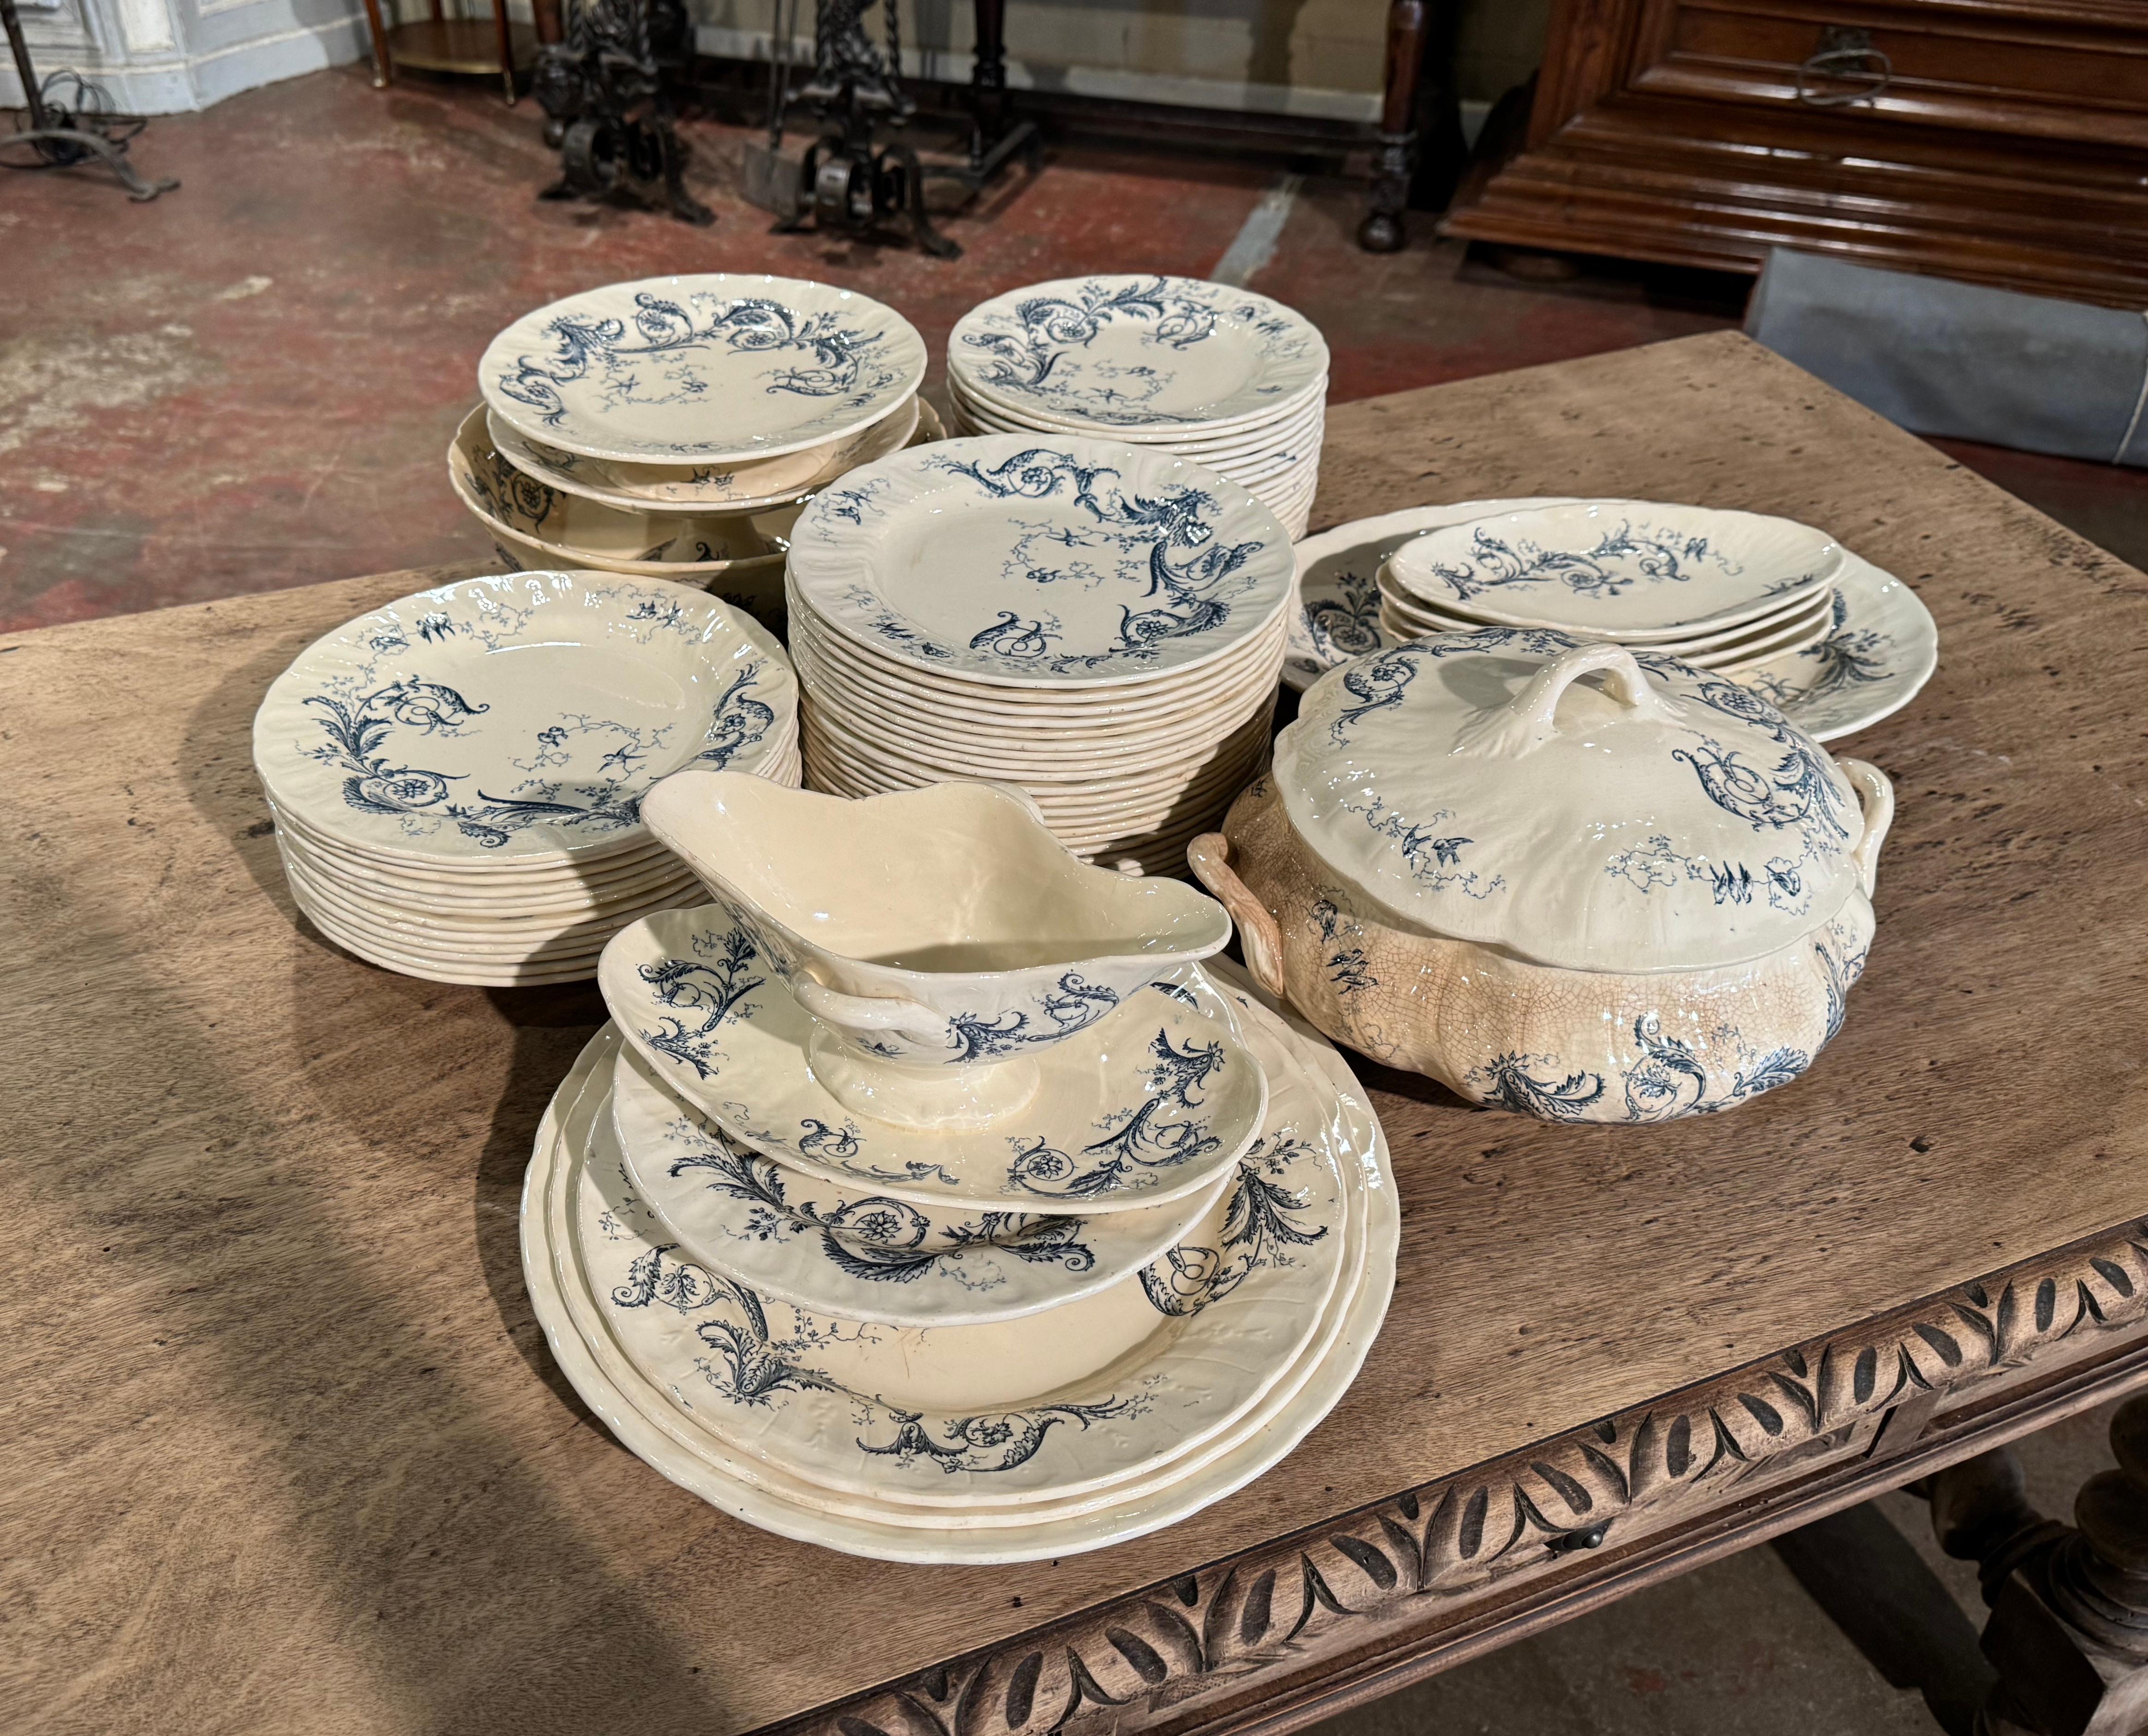 Decorate a dining table or shelving with this antique porcelain service set of 67 pieces. Crafted in France circa 1880 by Gien, each plate and dish with foliate and floral motifs, is stamped on the bottom 